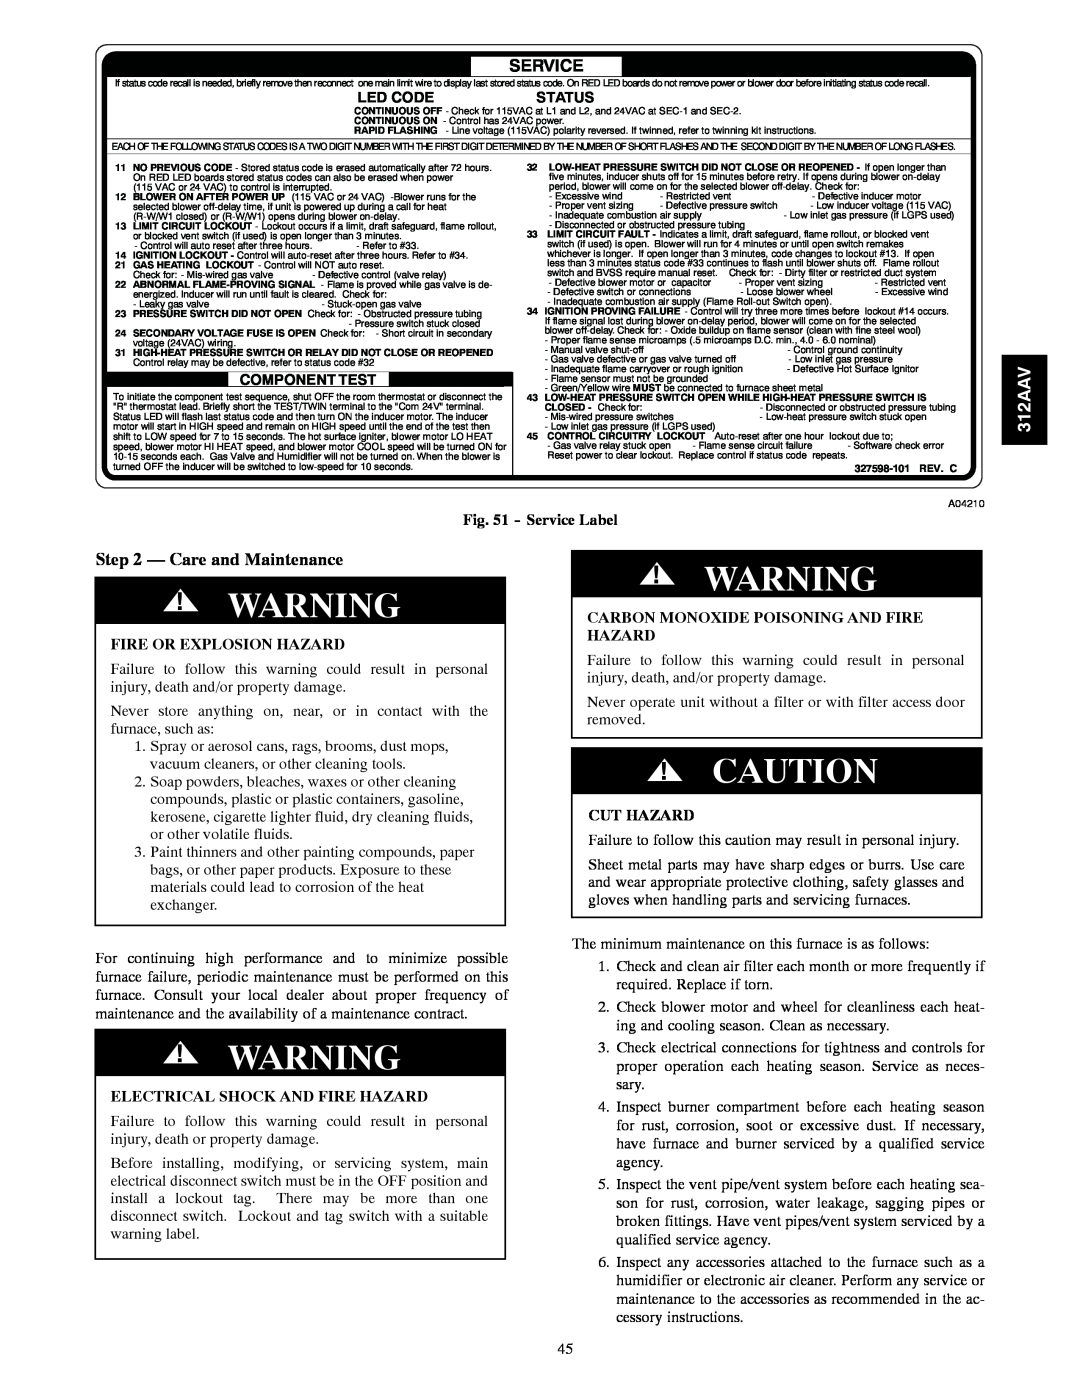 Bryant 312AAV/JAV Care and Maintenance, Service Label, Carbon Monoxide Poisoning And Fire Hazard, Fire Or Explosion Hazard 